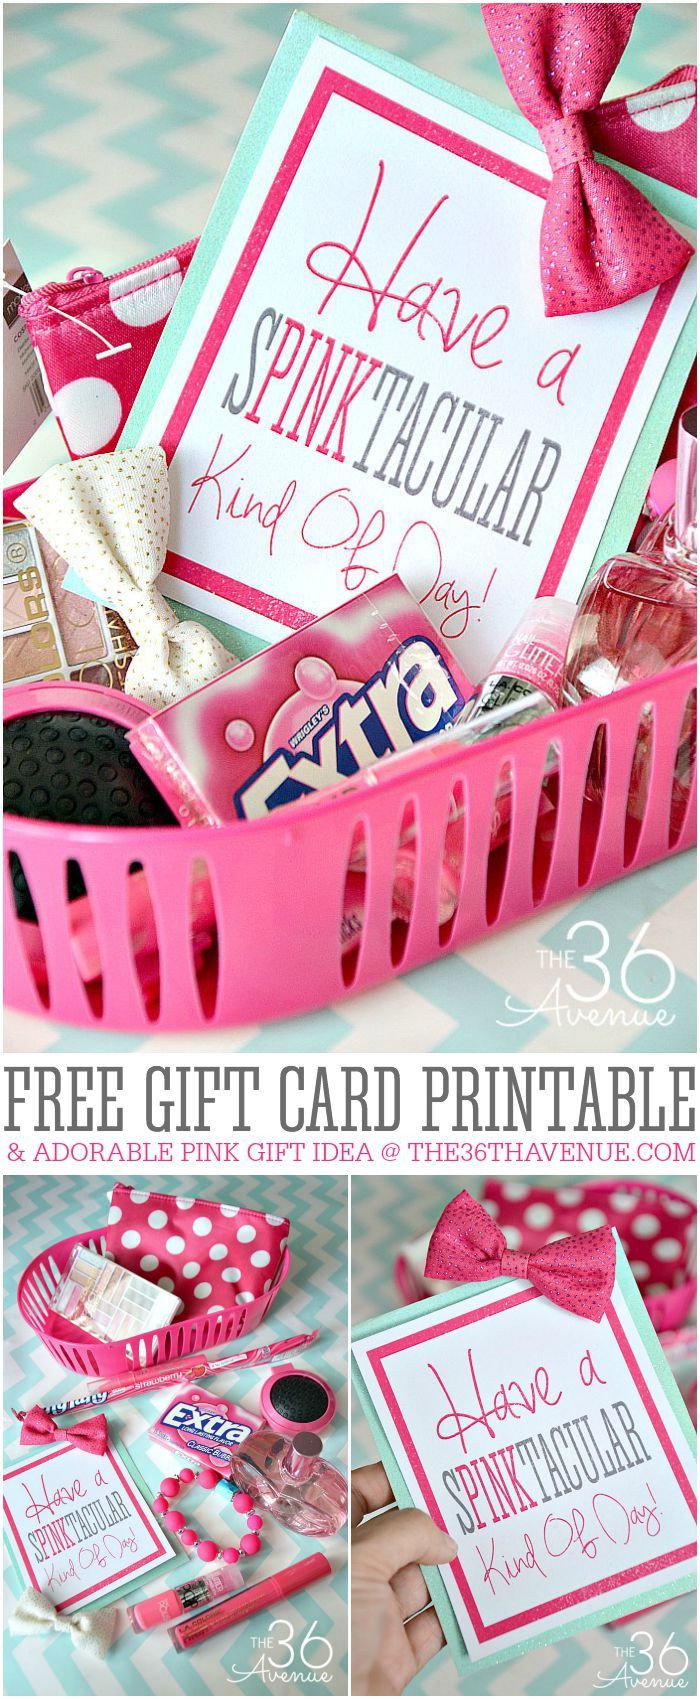 Free Gift Ideas For Girlfriend
 Colorful t basket ideas A girl and a glue gun